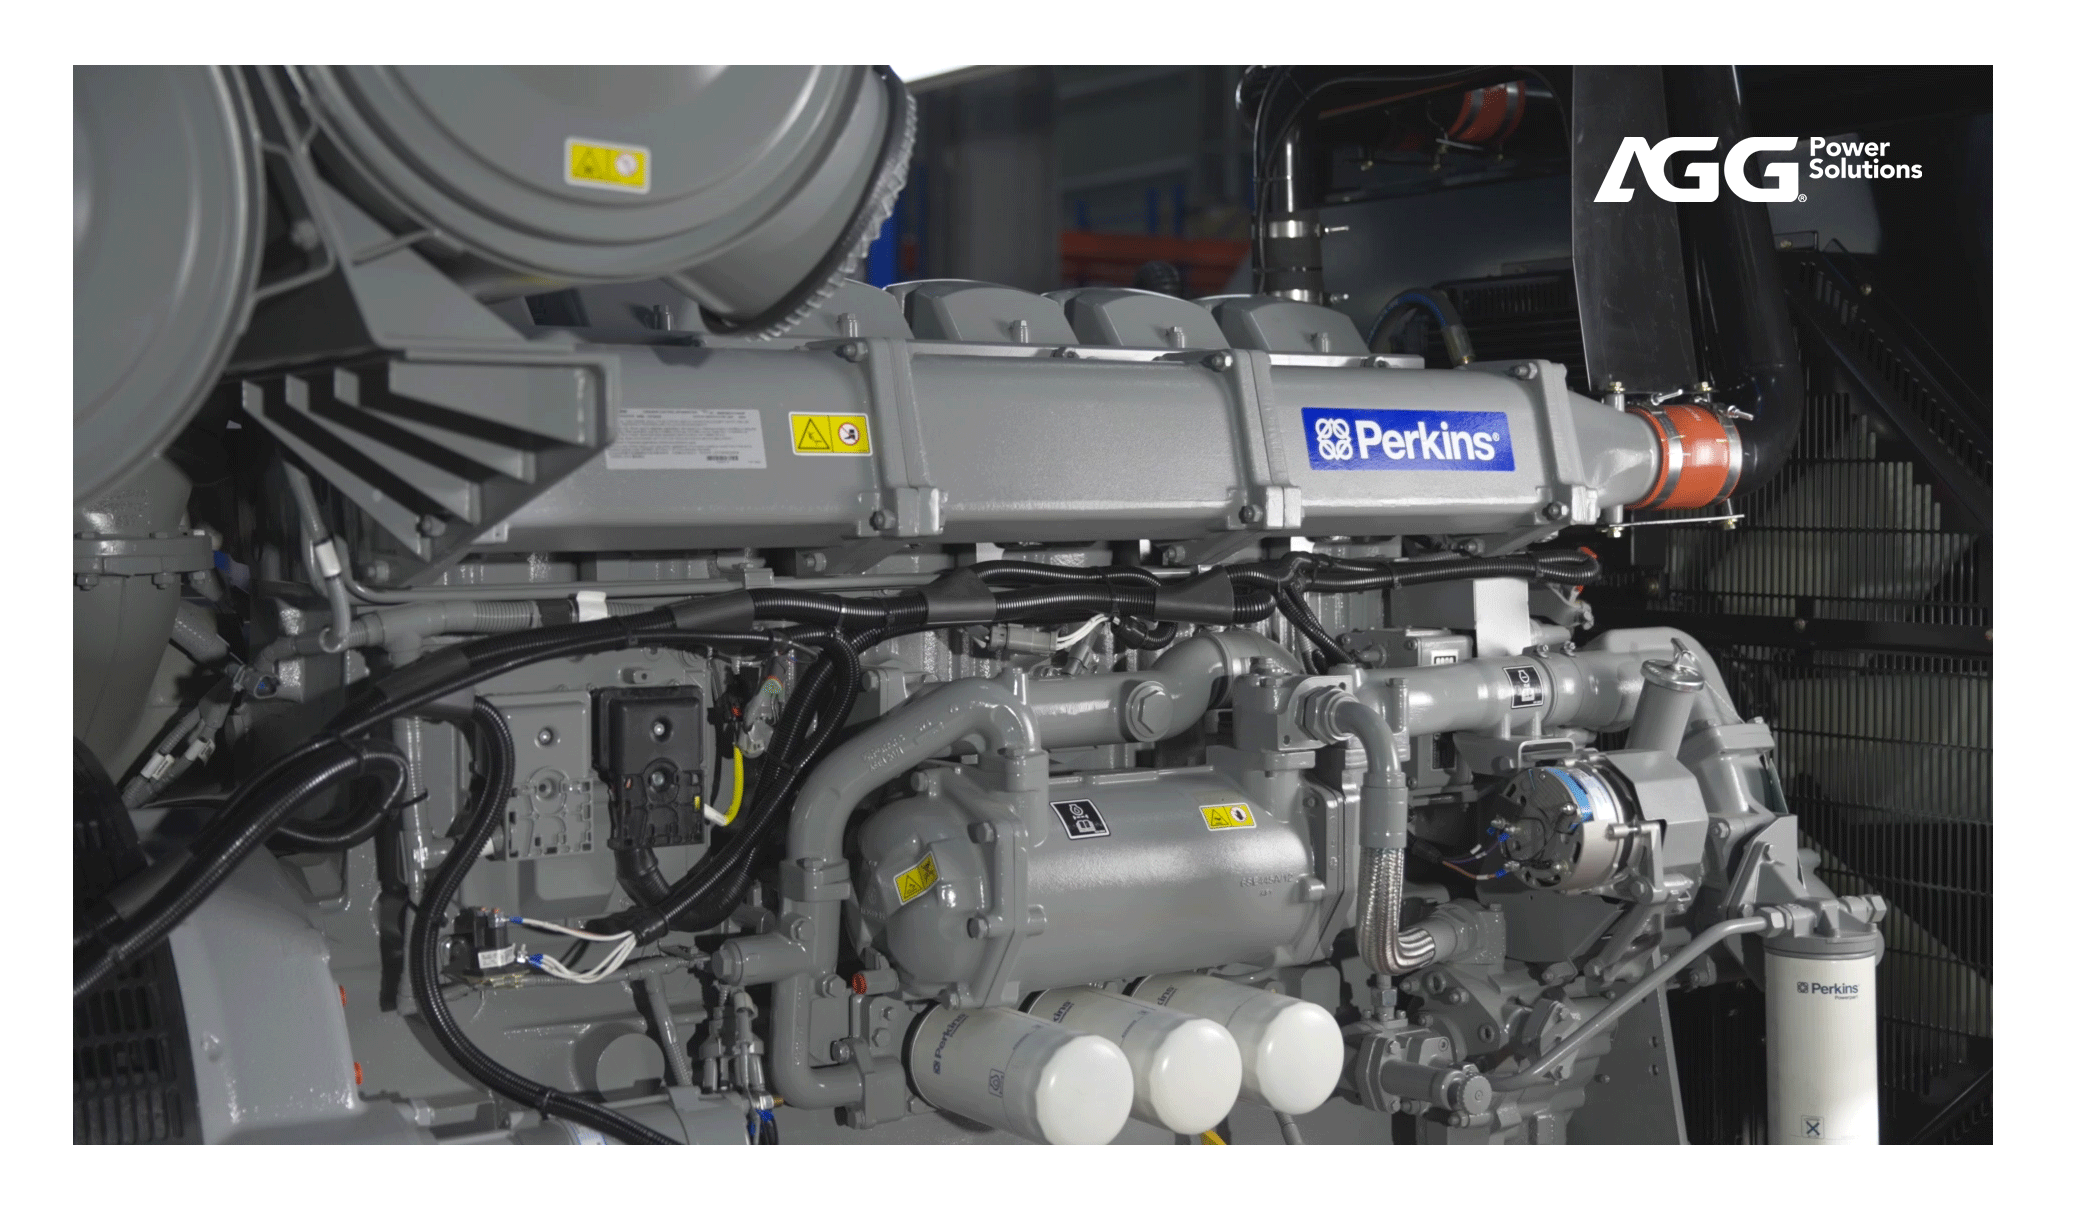 Together with Perkins Engines, AGG powers a better world!